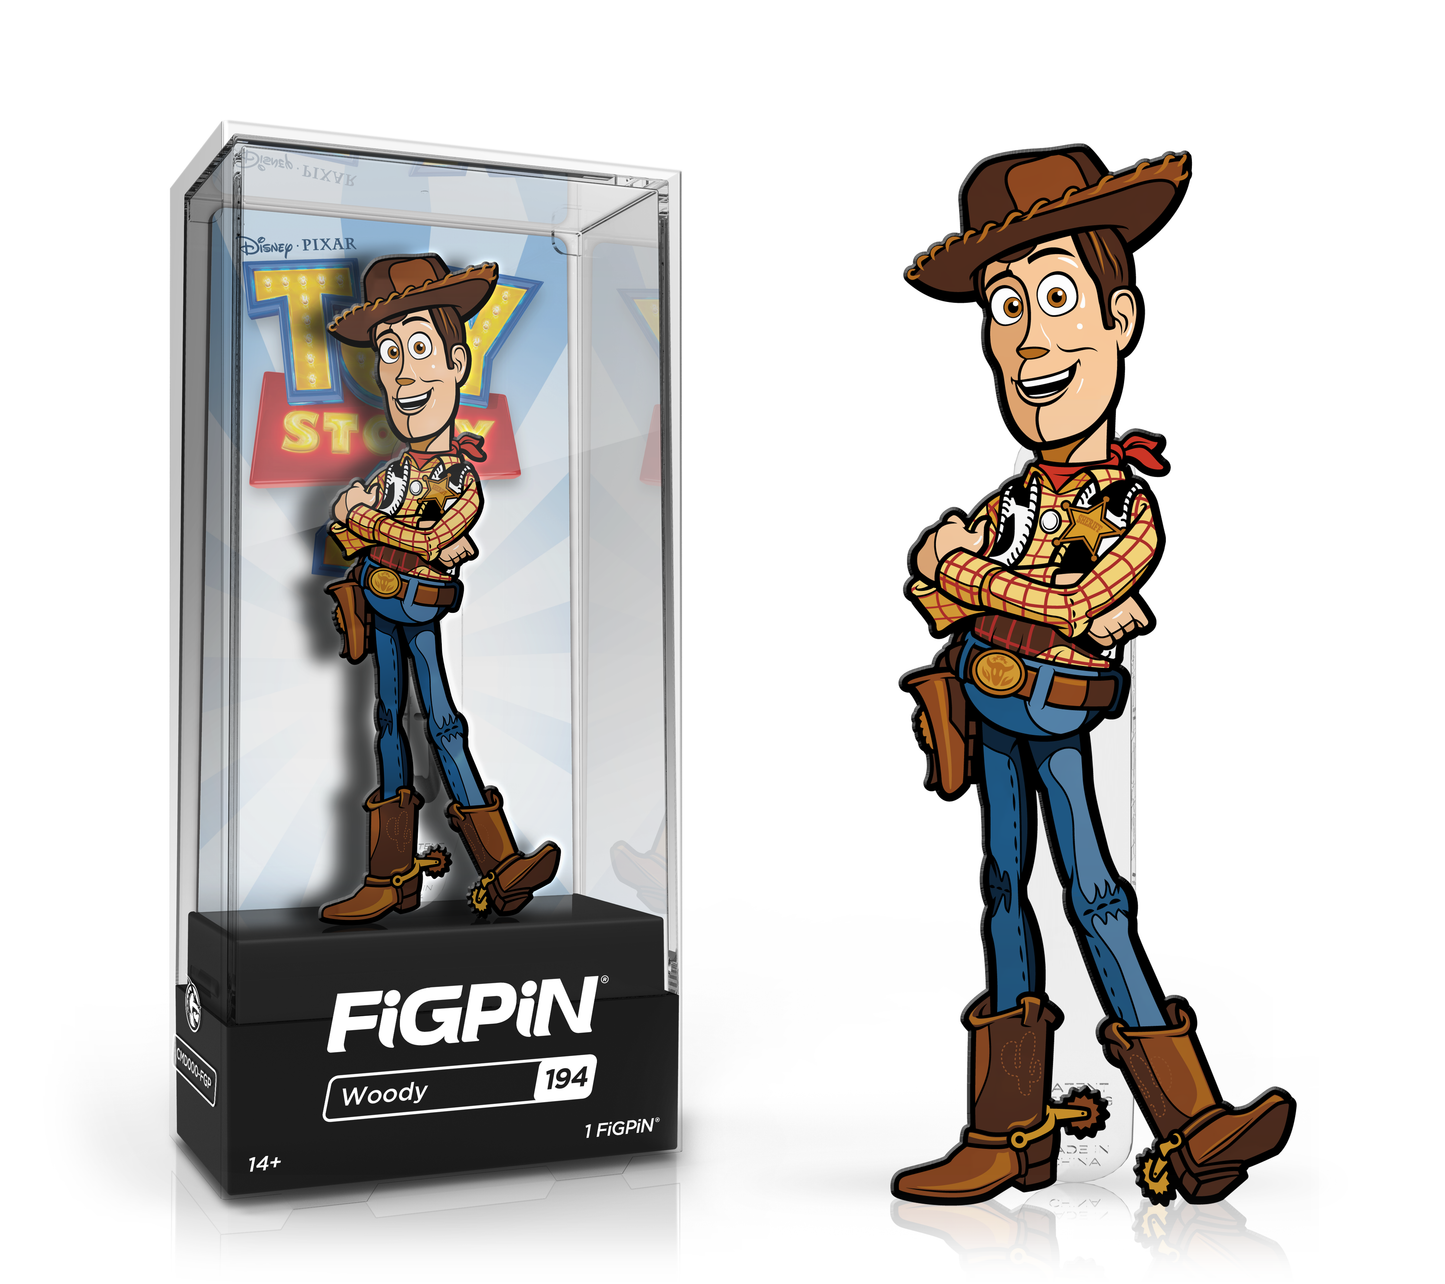 Toy Story 4 - Woody 3" Collectors FigPin #194